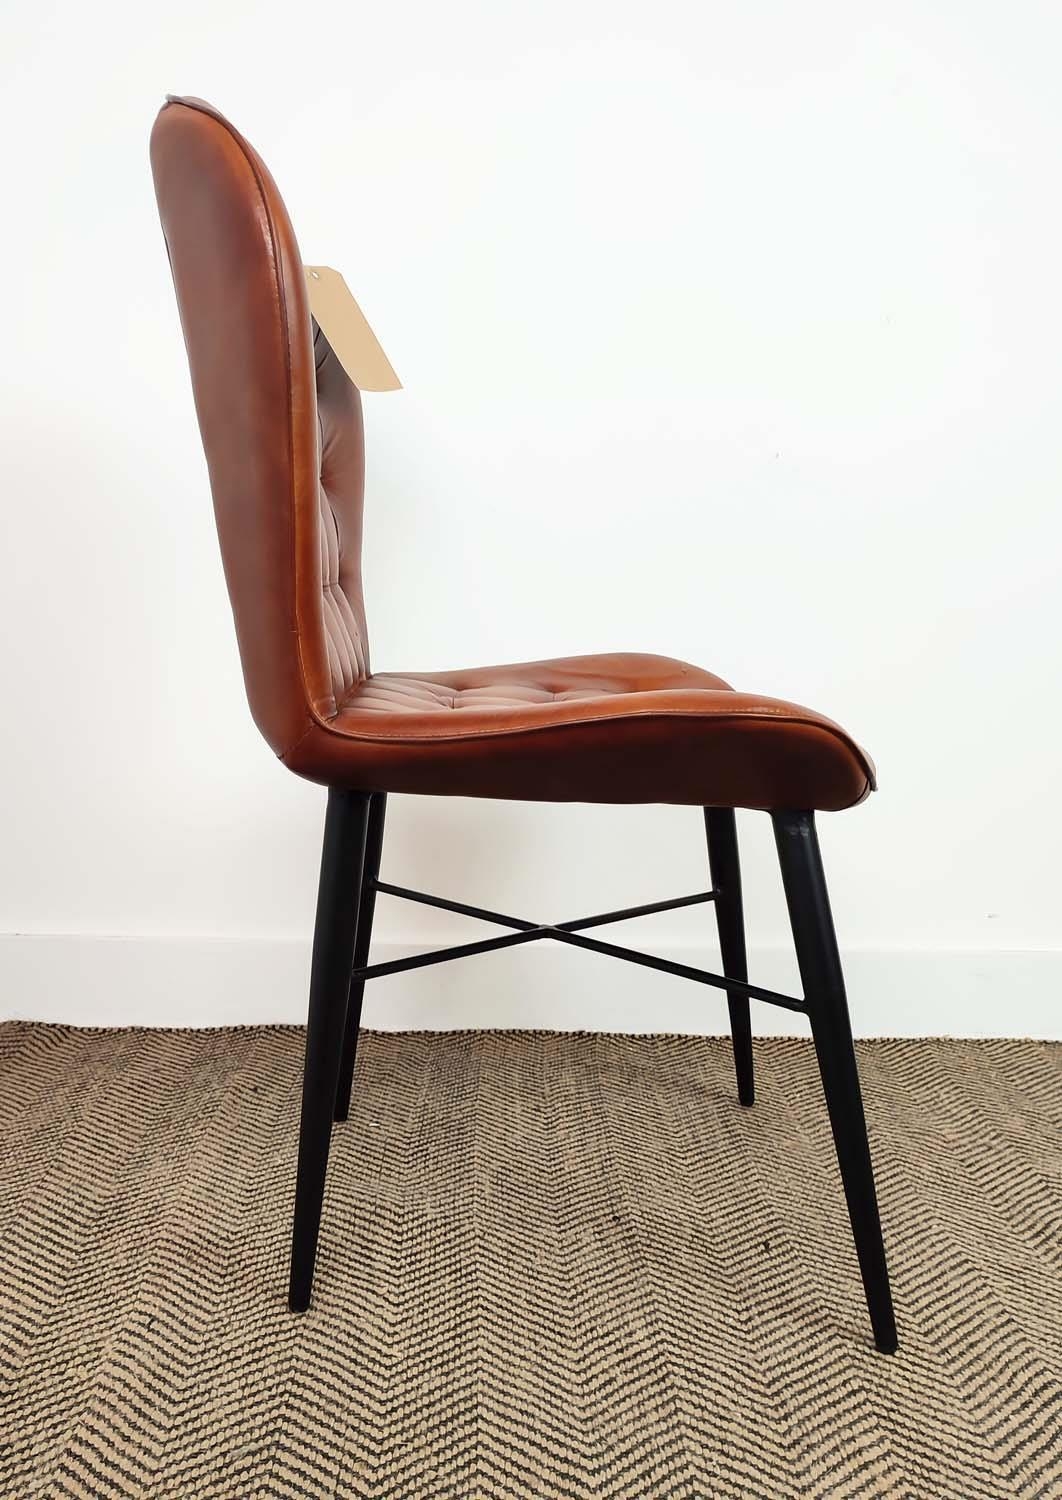 SIDE CHAIRS, a pair, tan leather upholstery on metal supports, 58cm x 90cm H x 50cm. (2) - Image 6 of 6